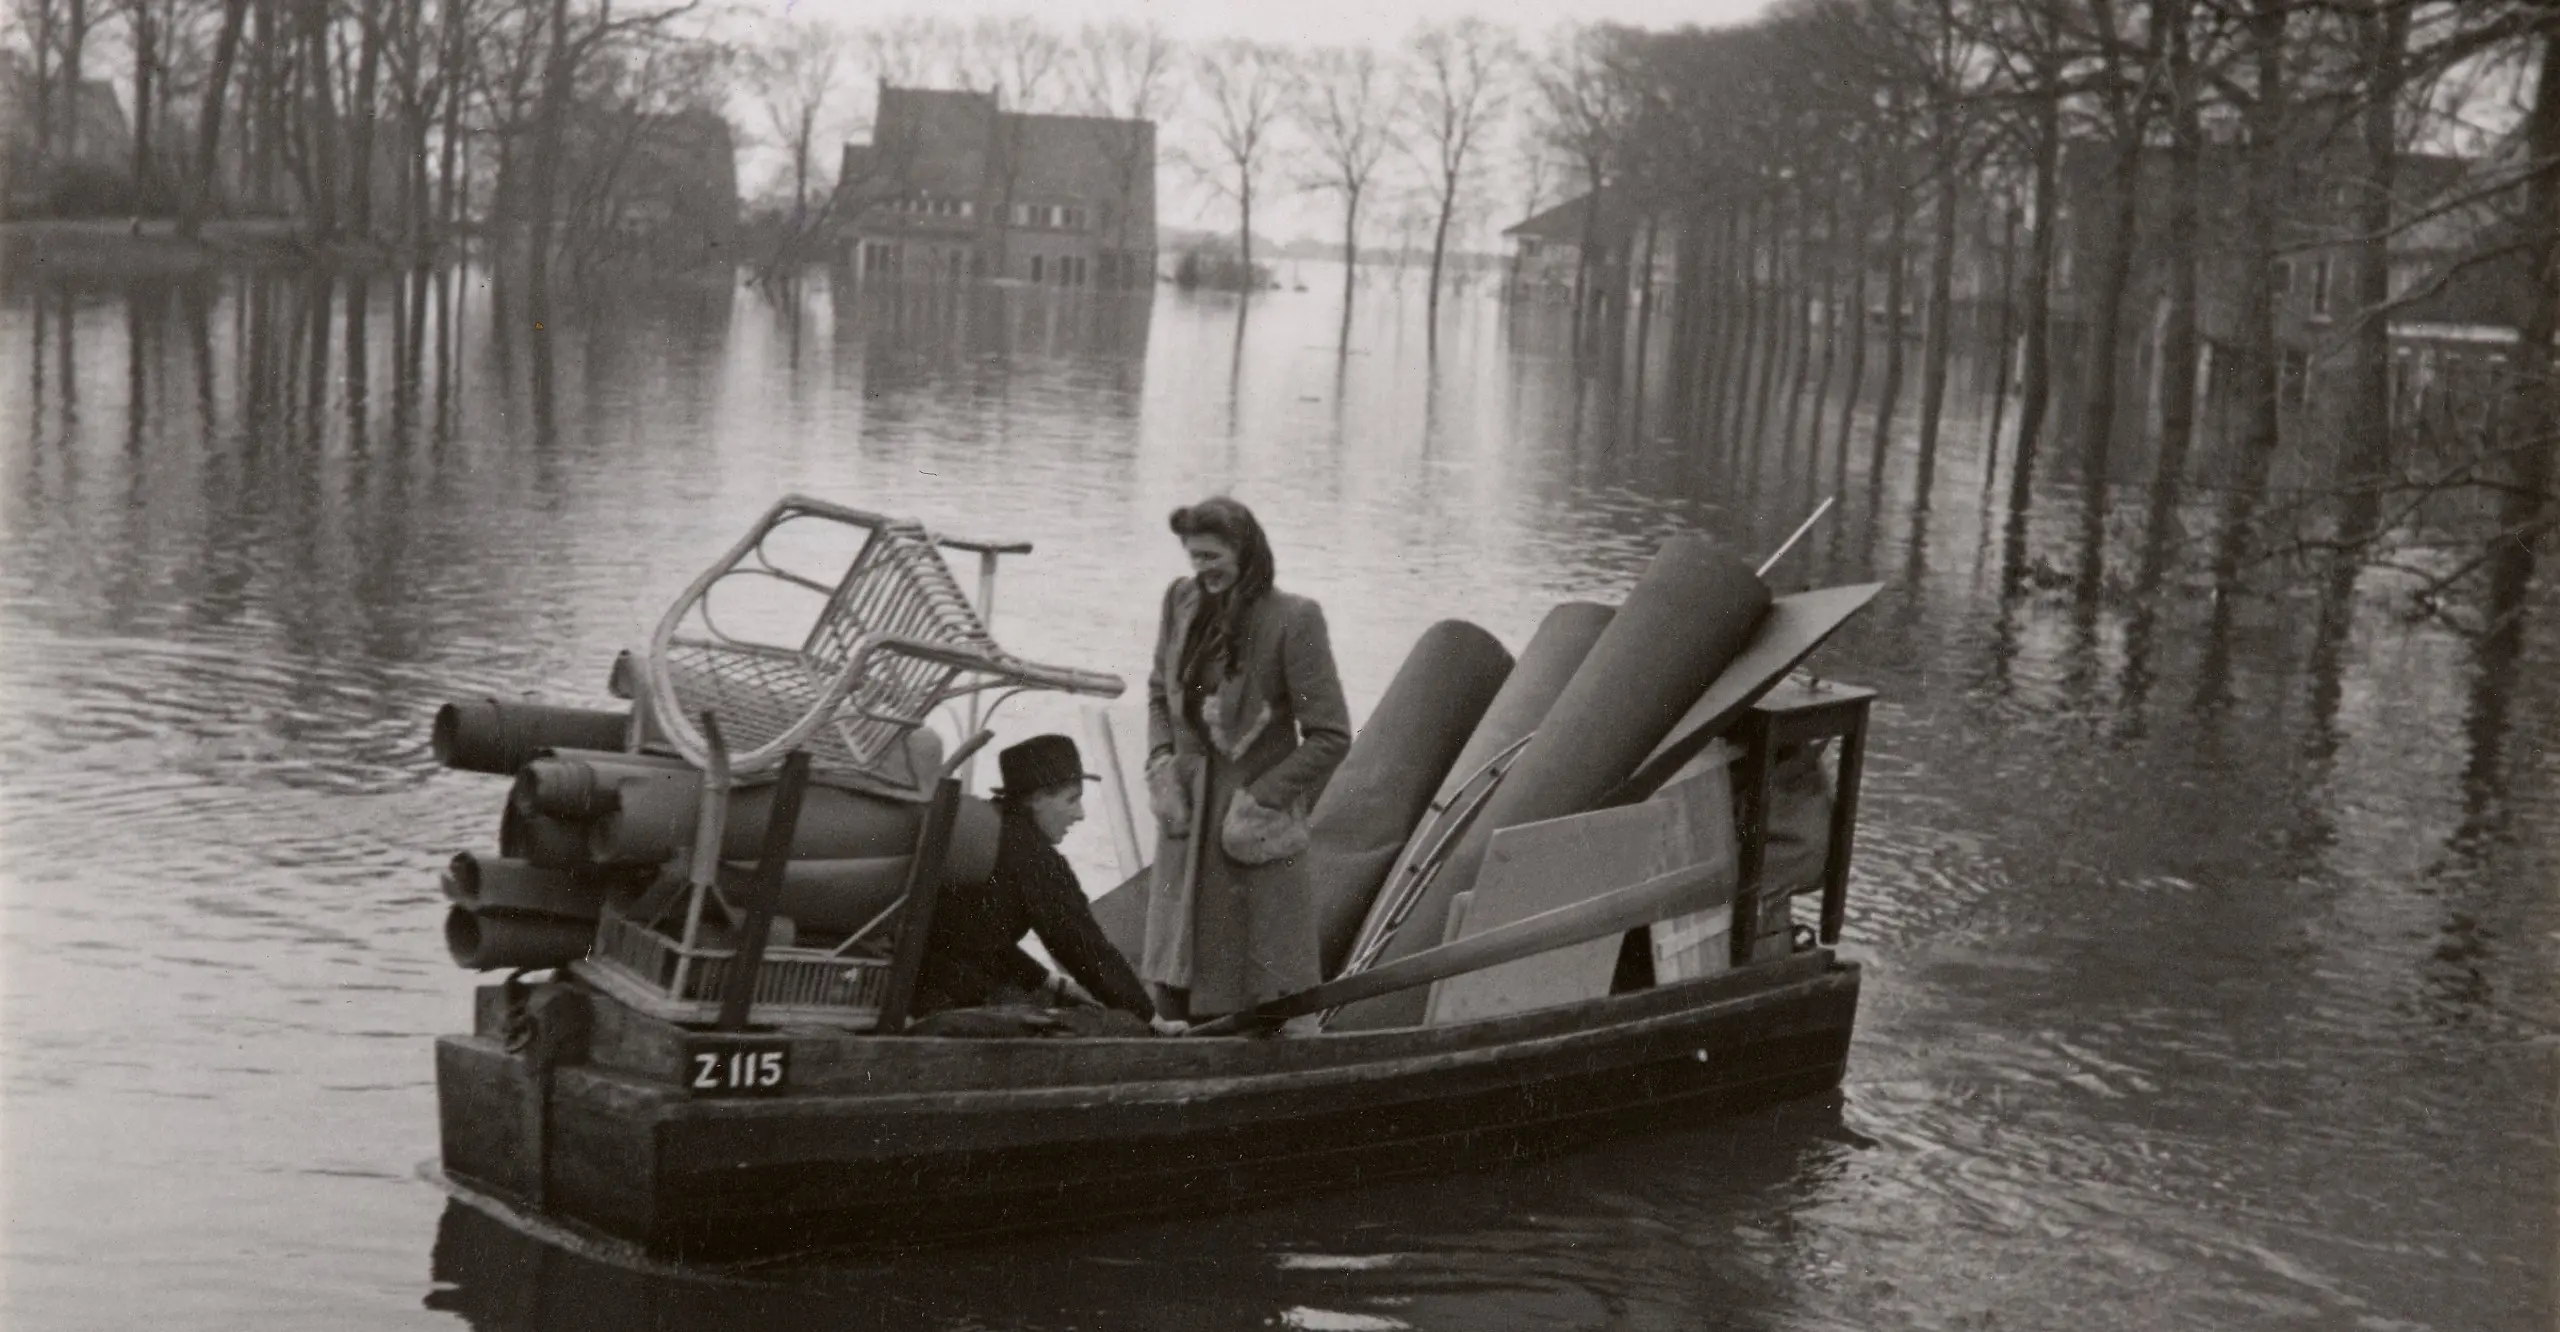 Black and white photograph of two people in a boat with stacked furniture, floating in flood waters